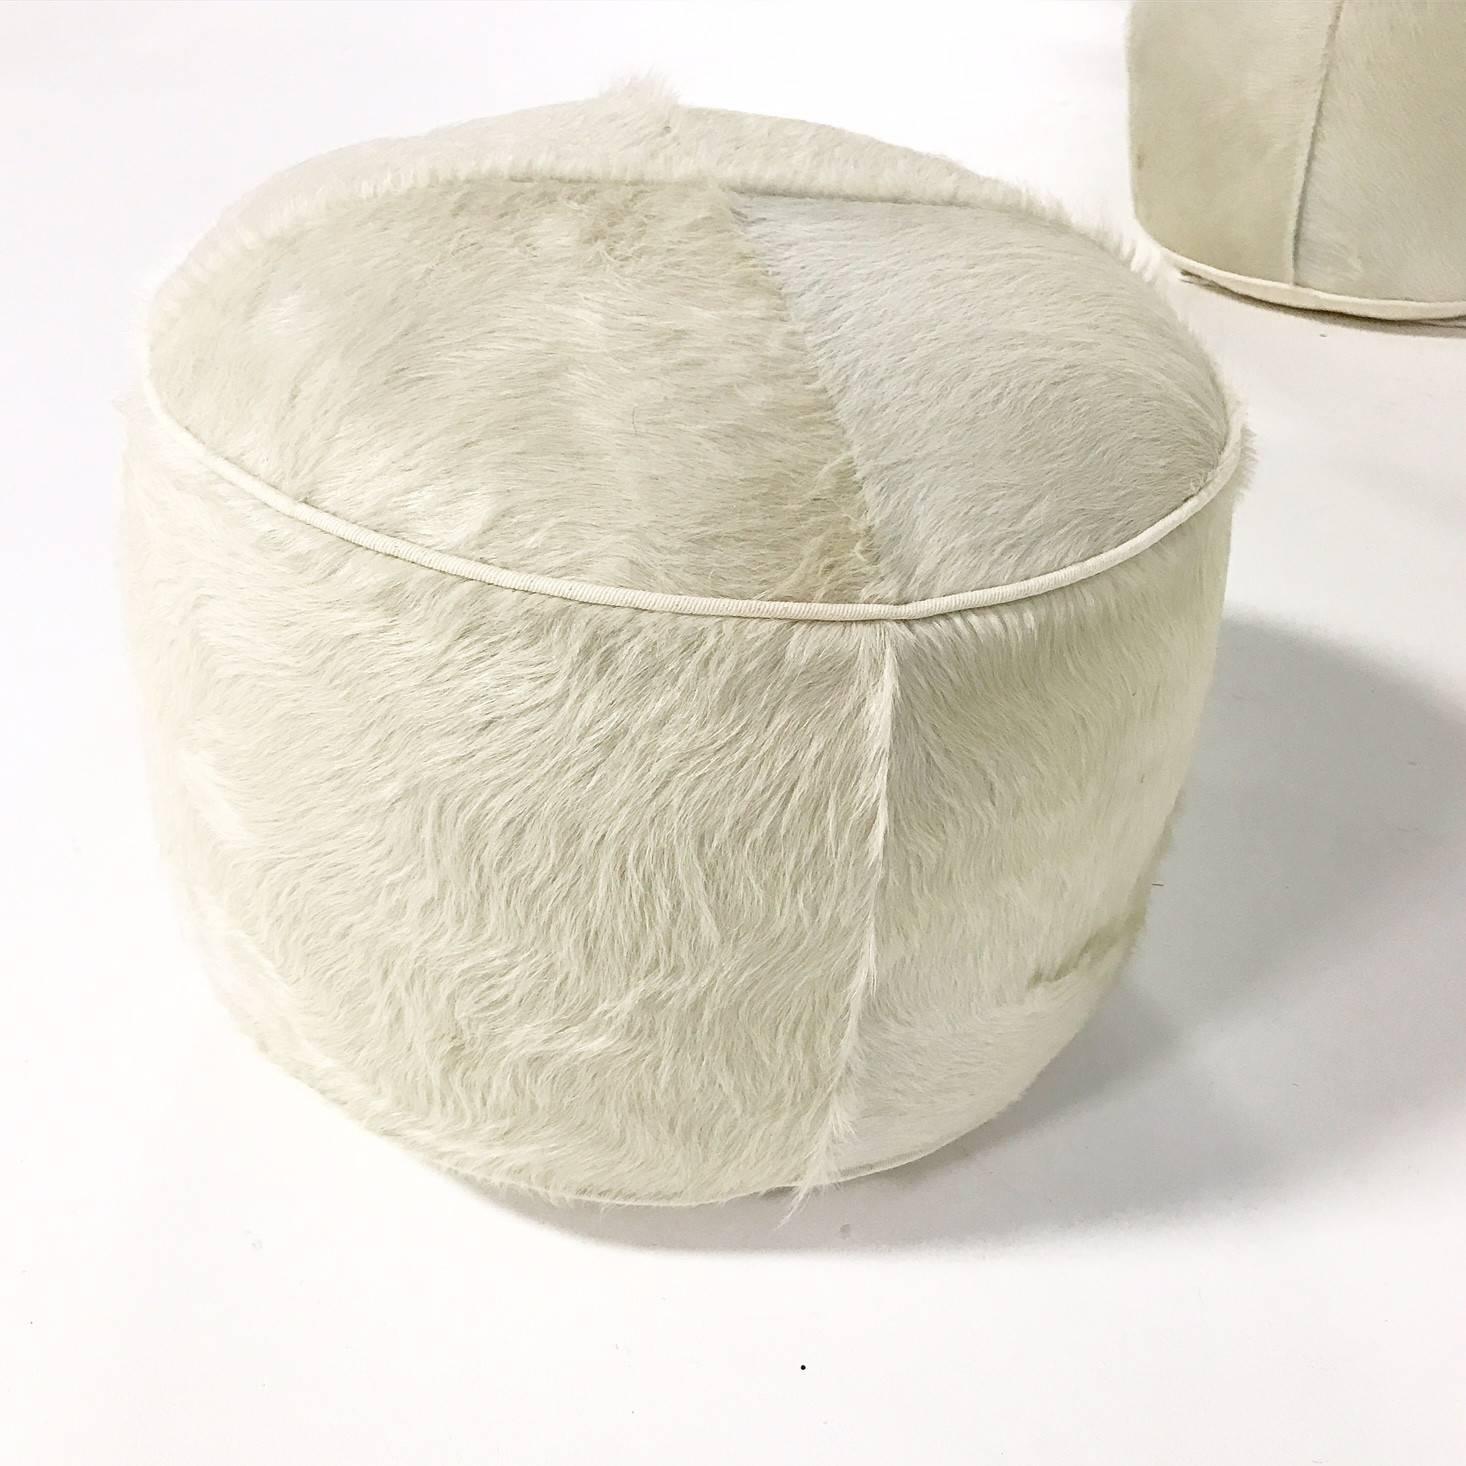 Our cowhide pouf ottomans are handcrafted from our beautiful Forsyth Brazilian cowhides. The most beautiful hides are selected, hand-cut, hand-stitched, and hand stuffed. Each step is meticulously curated by Saint Louis based Forsyth